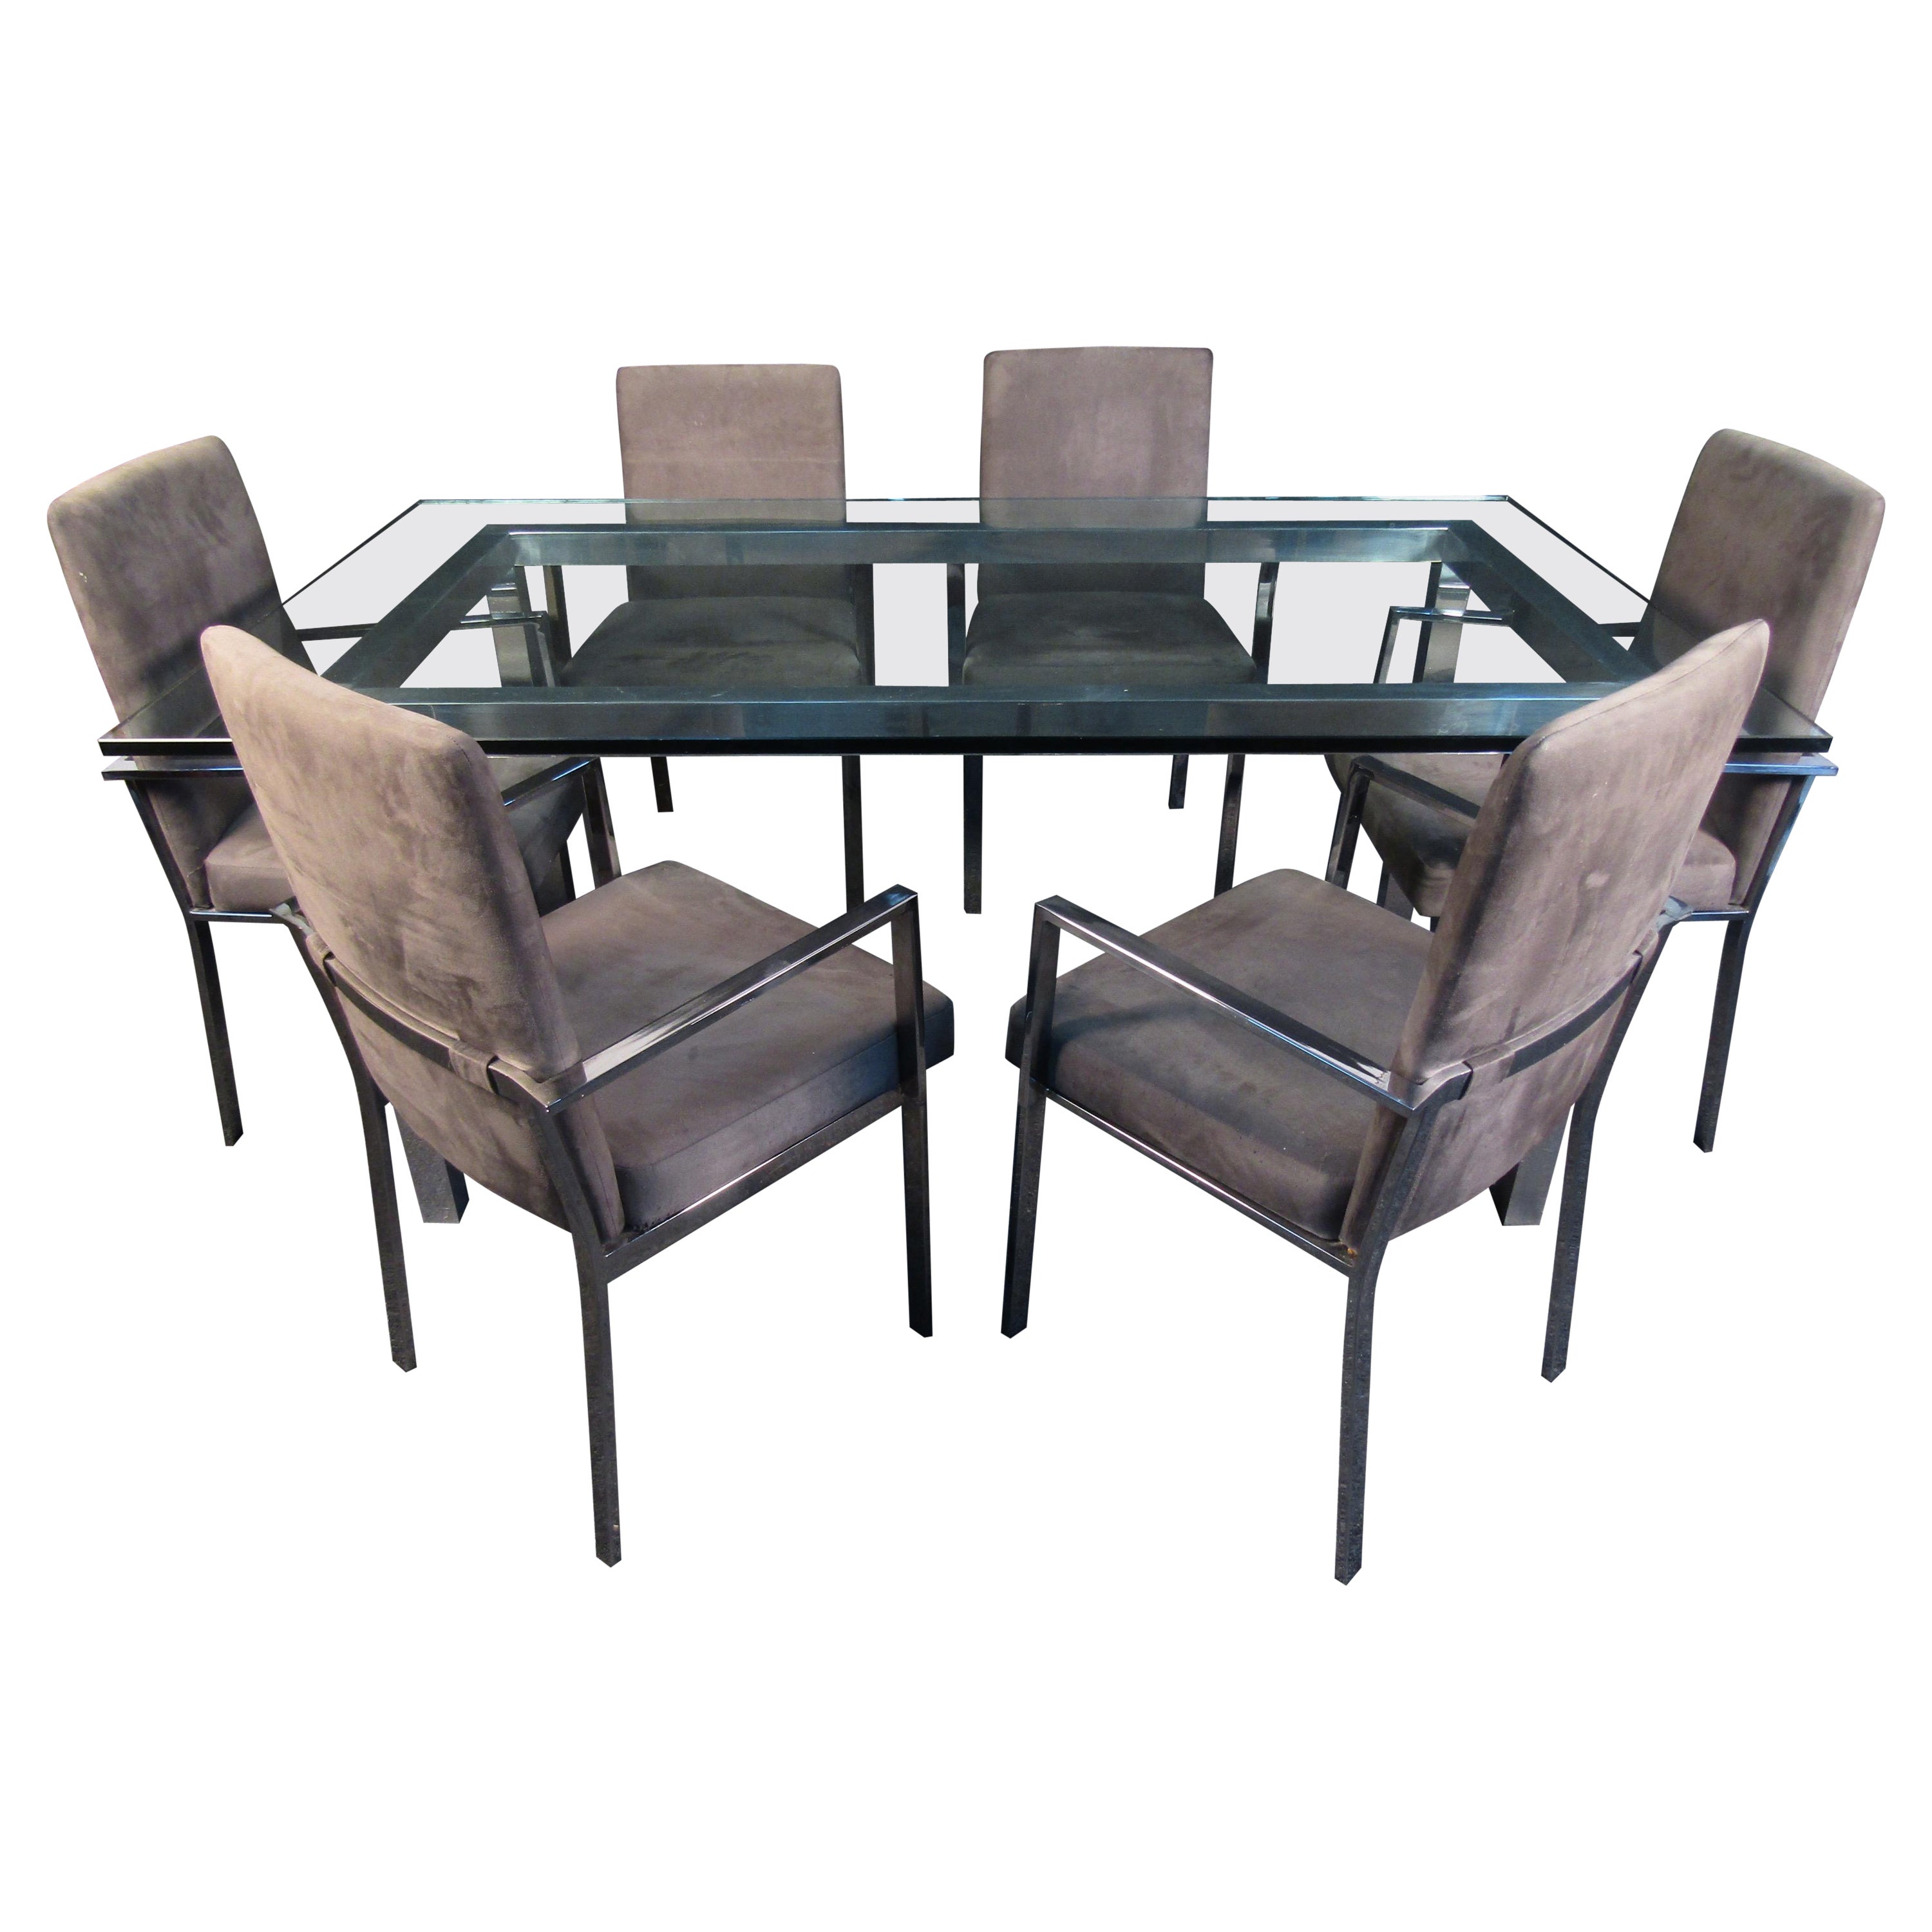 Mid-Century Modern Glass and Chrome Dining Set